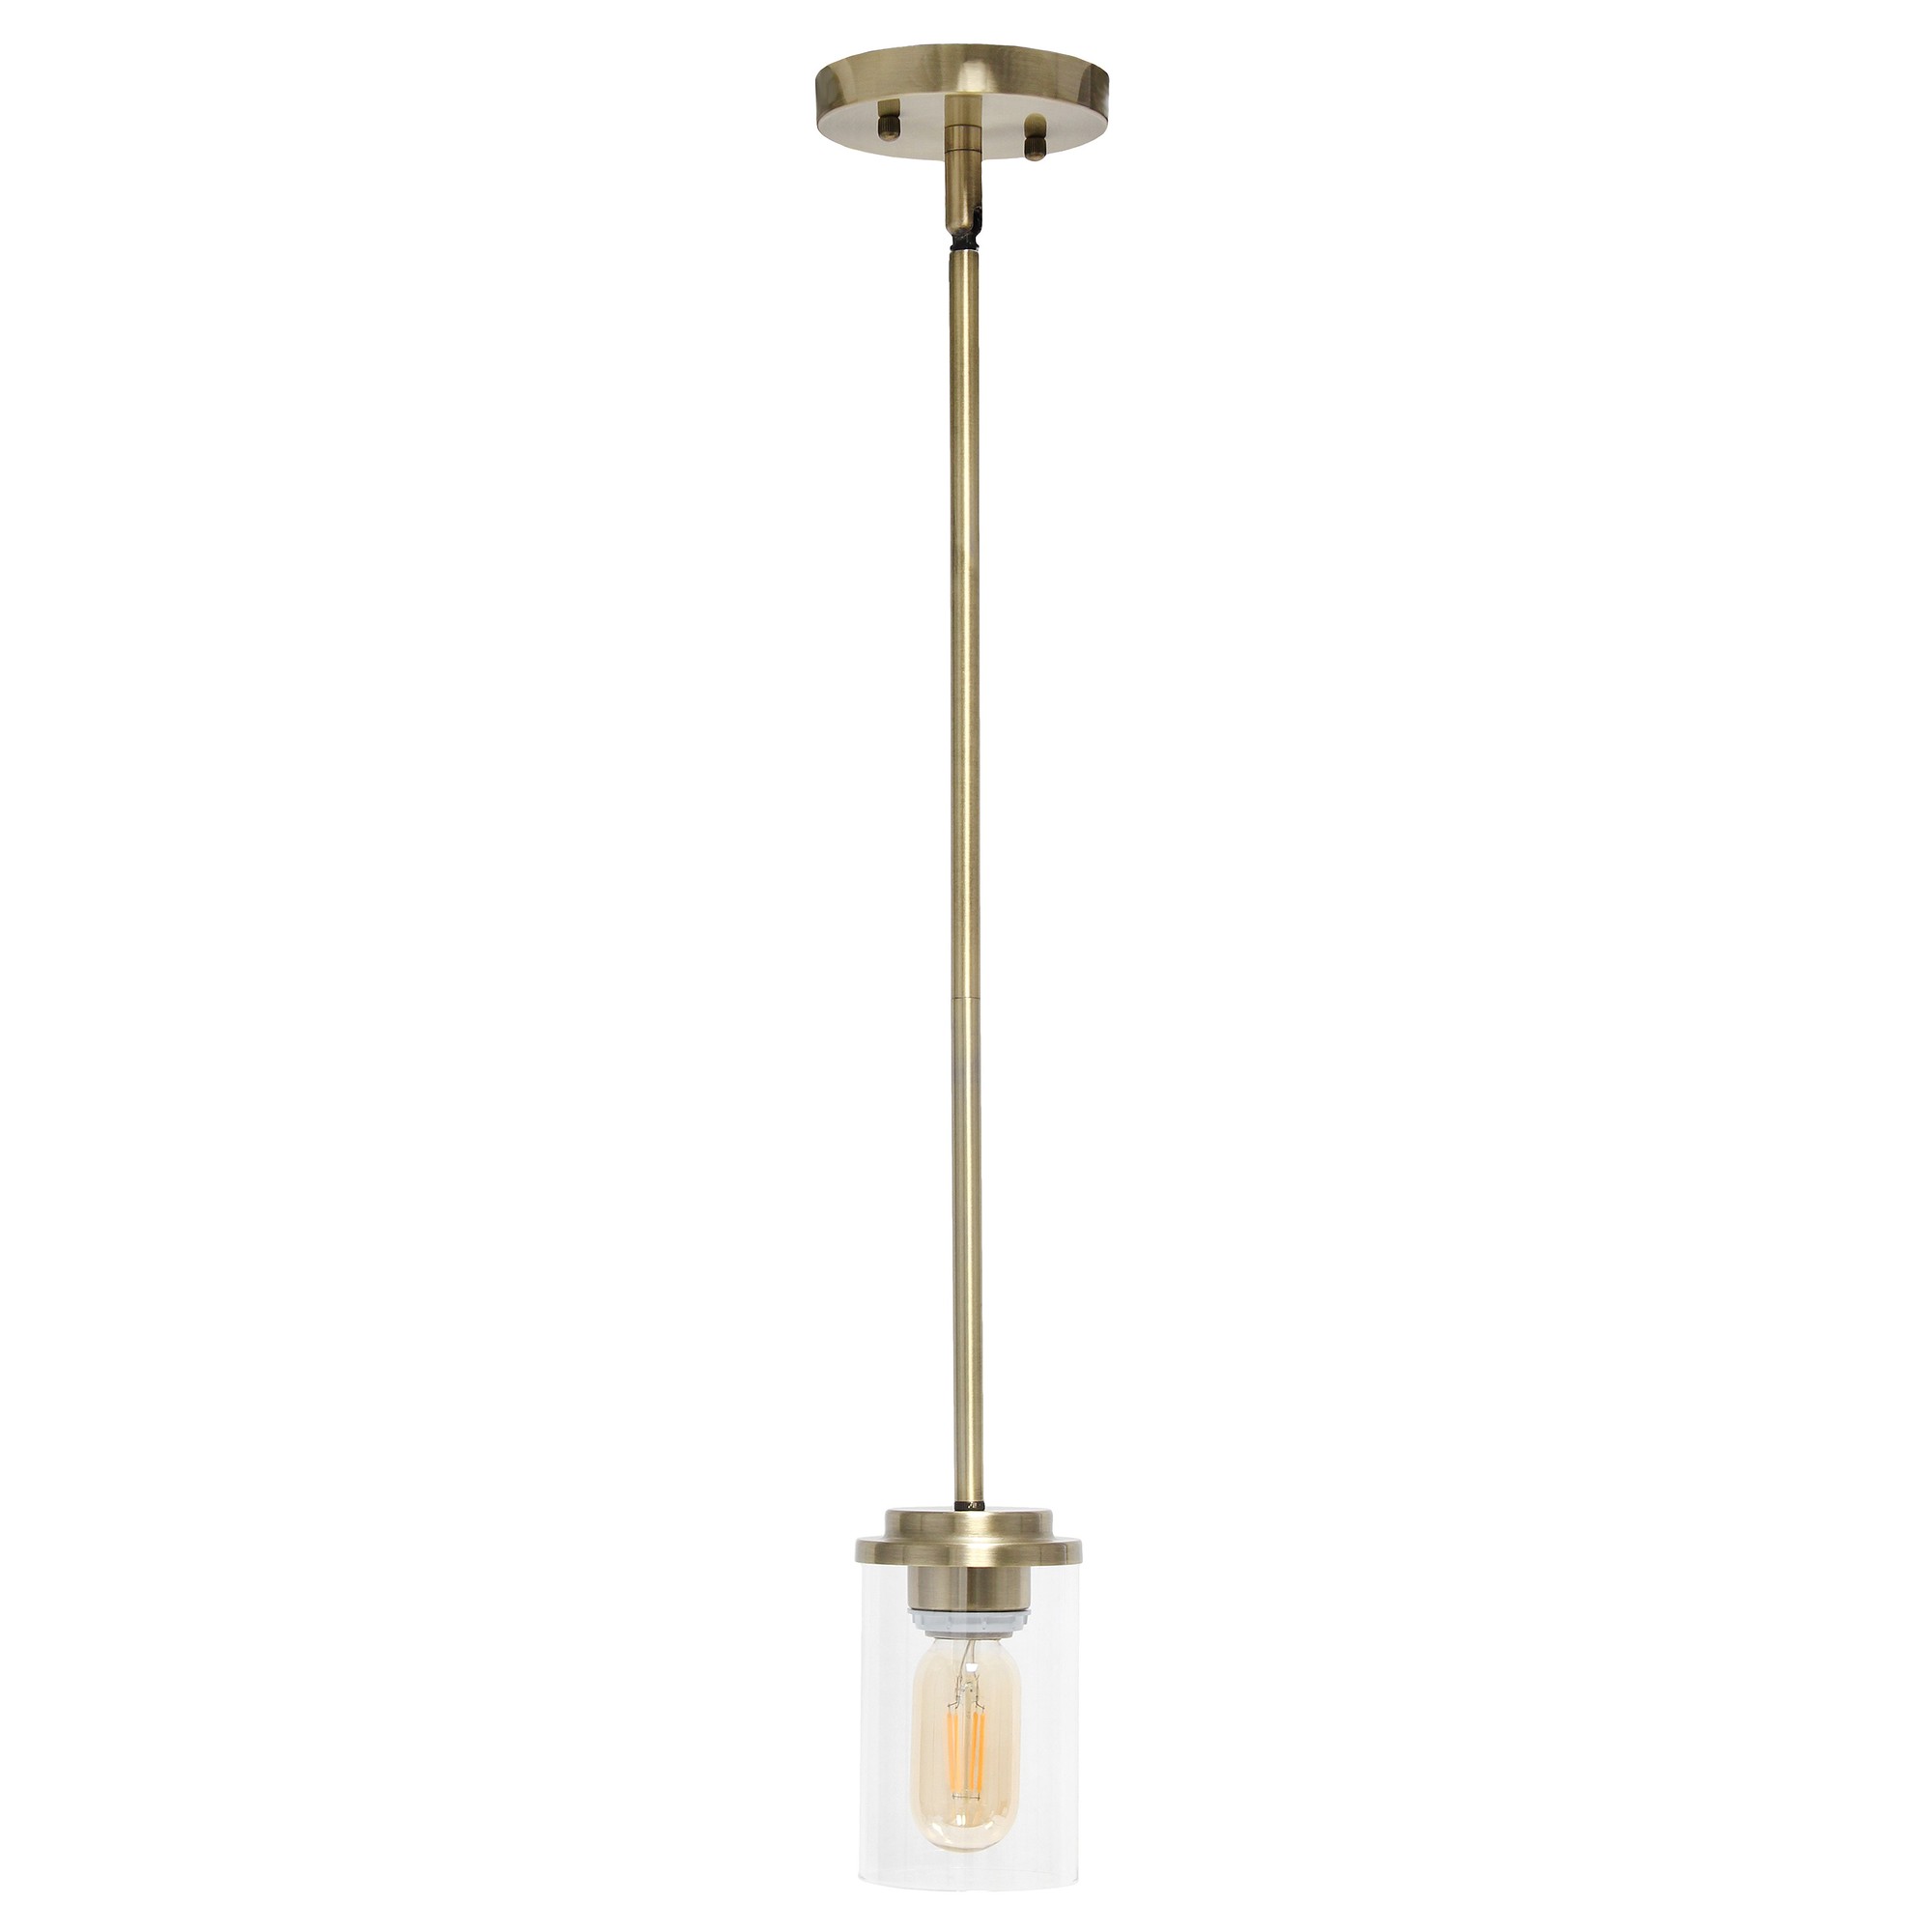 Lalia Home 1-Light 5.75" Minimalist Industrial Farmhouse Adjustable Hanging Clear Cylinder Glass Pendant Fixture, Antique Brass